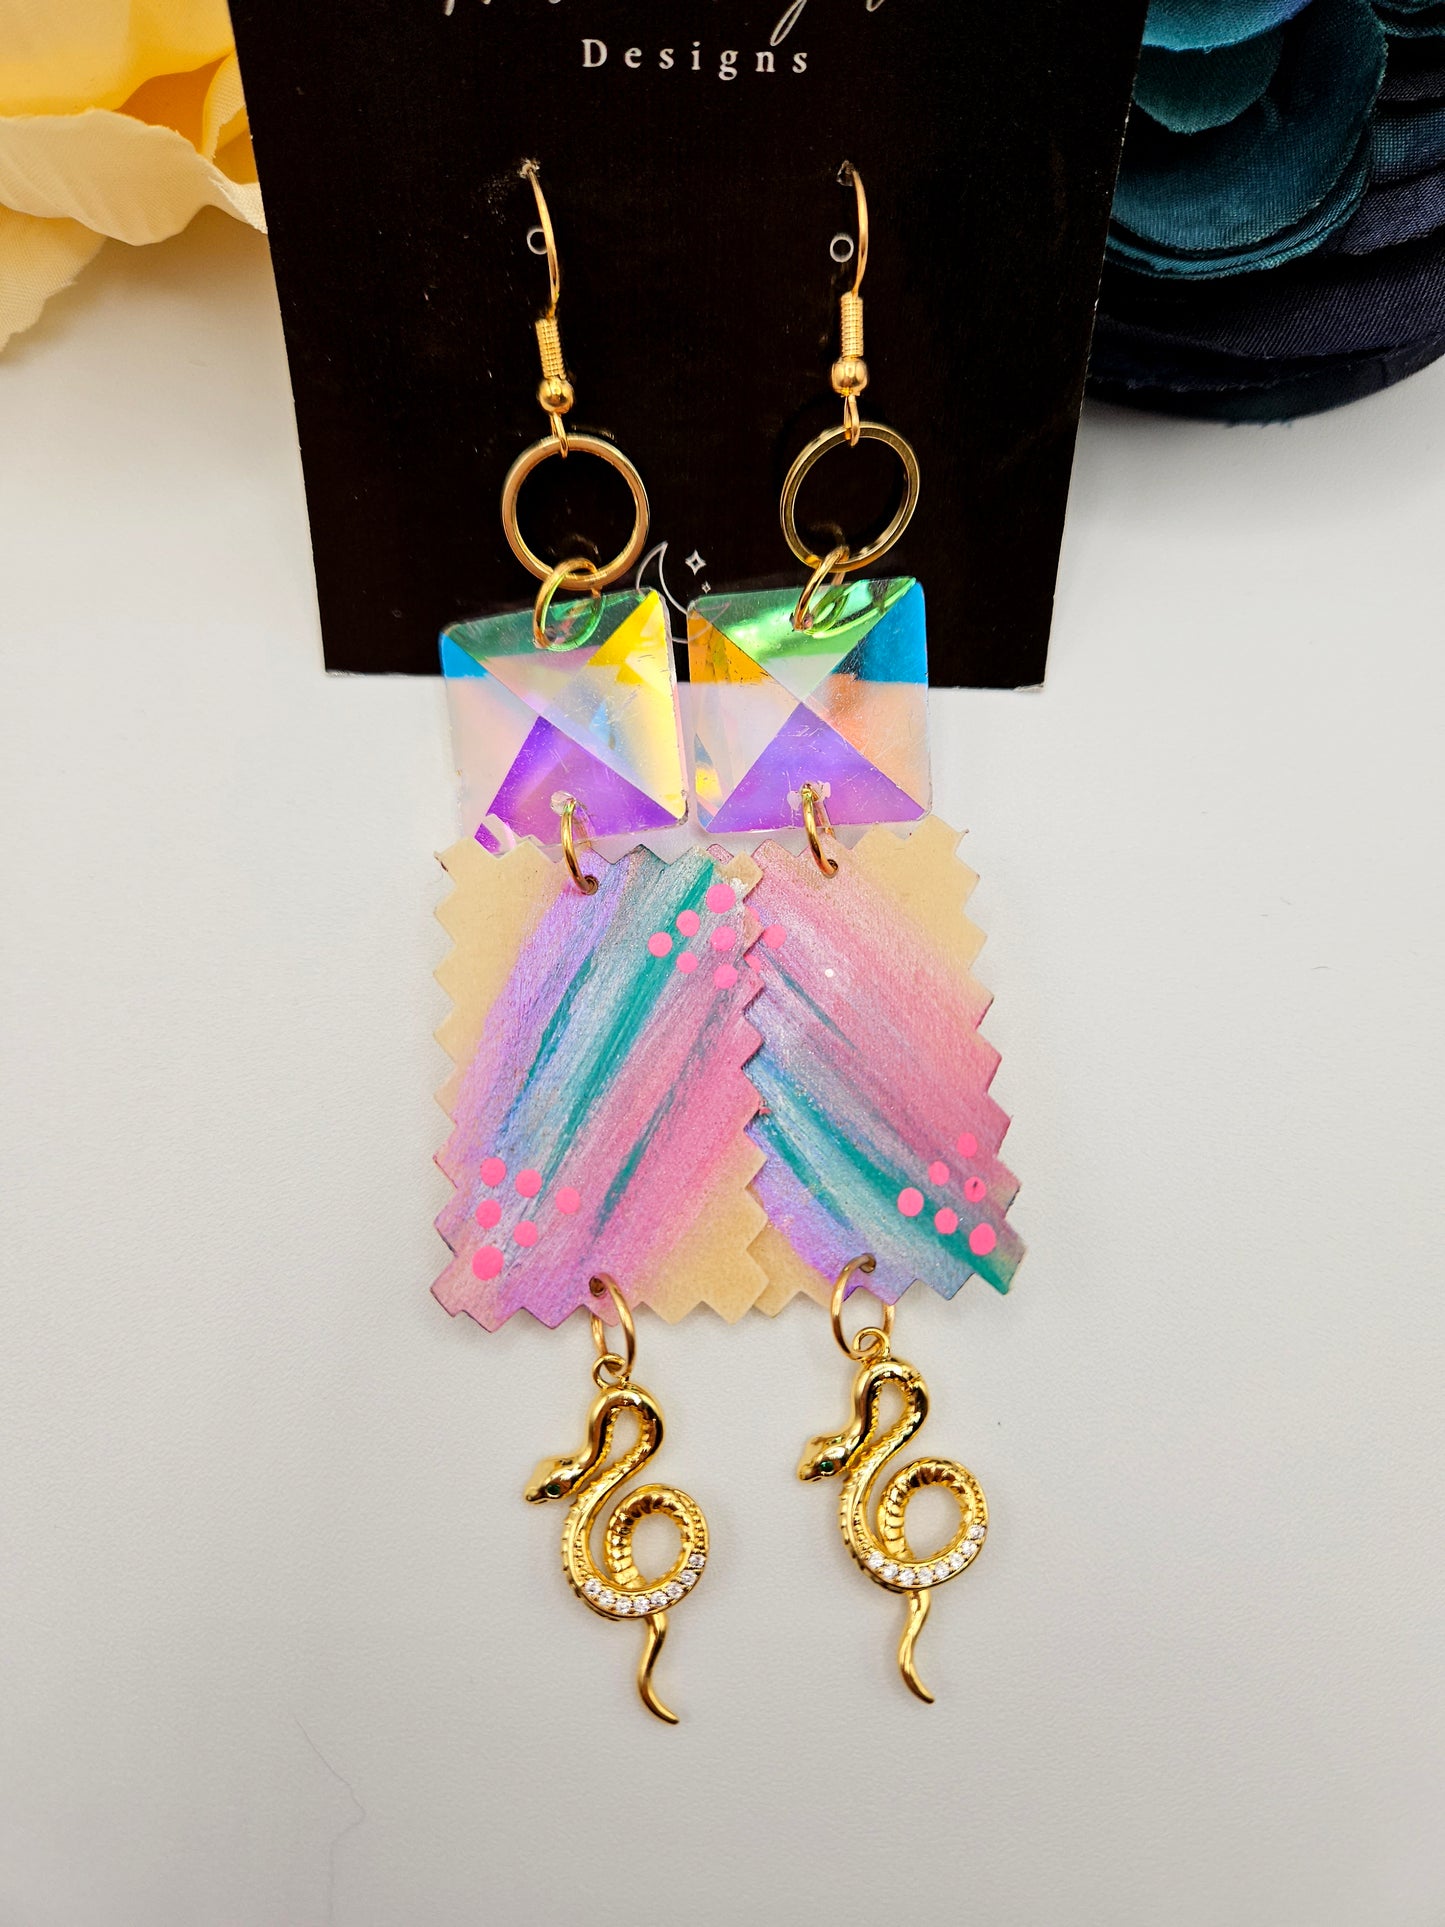 Painted Parfleche and Snake Earrings